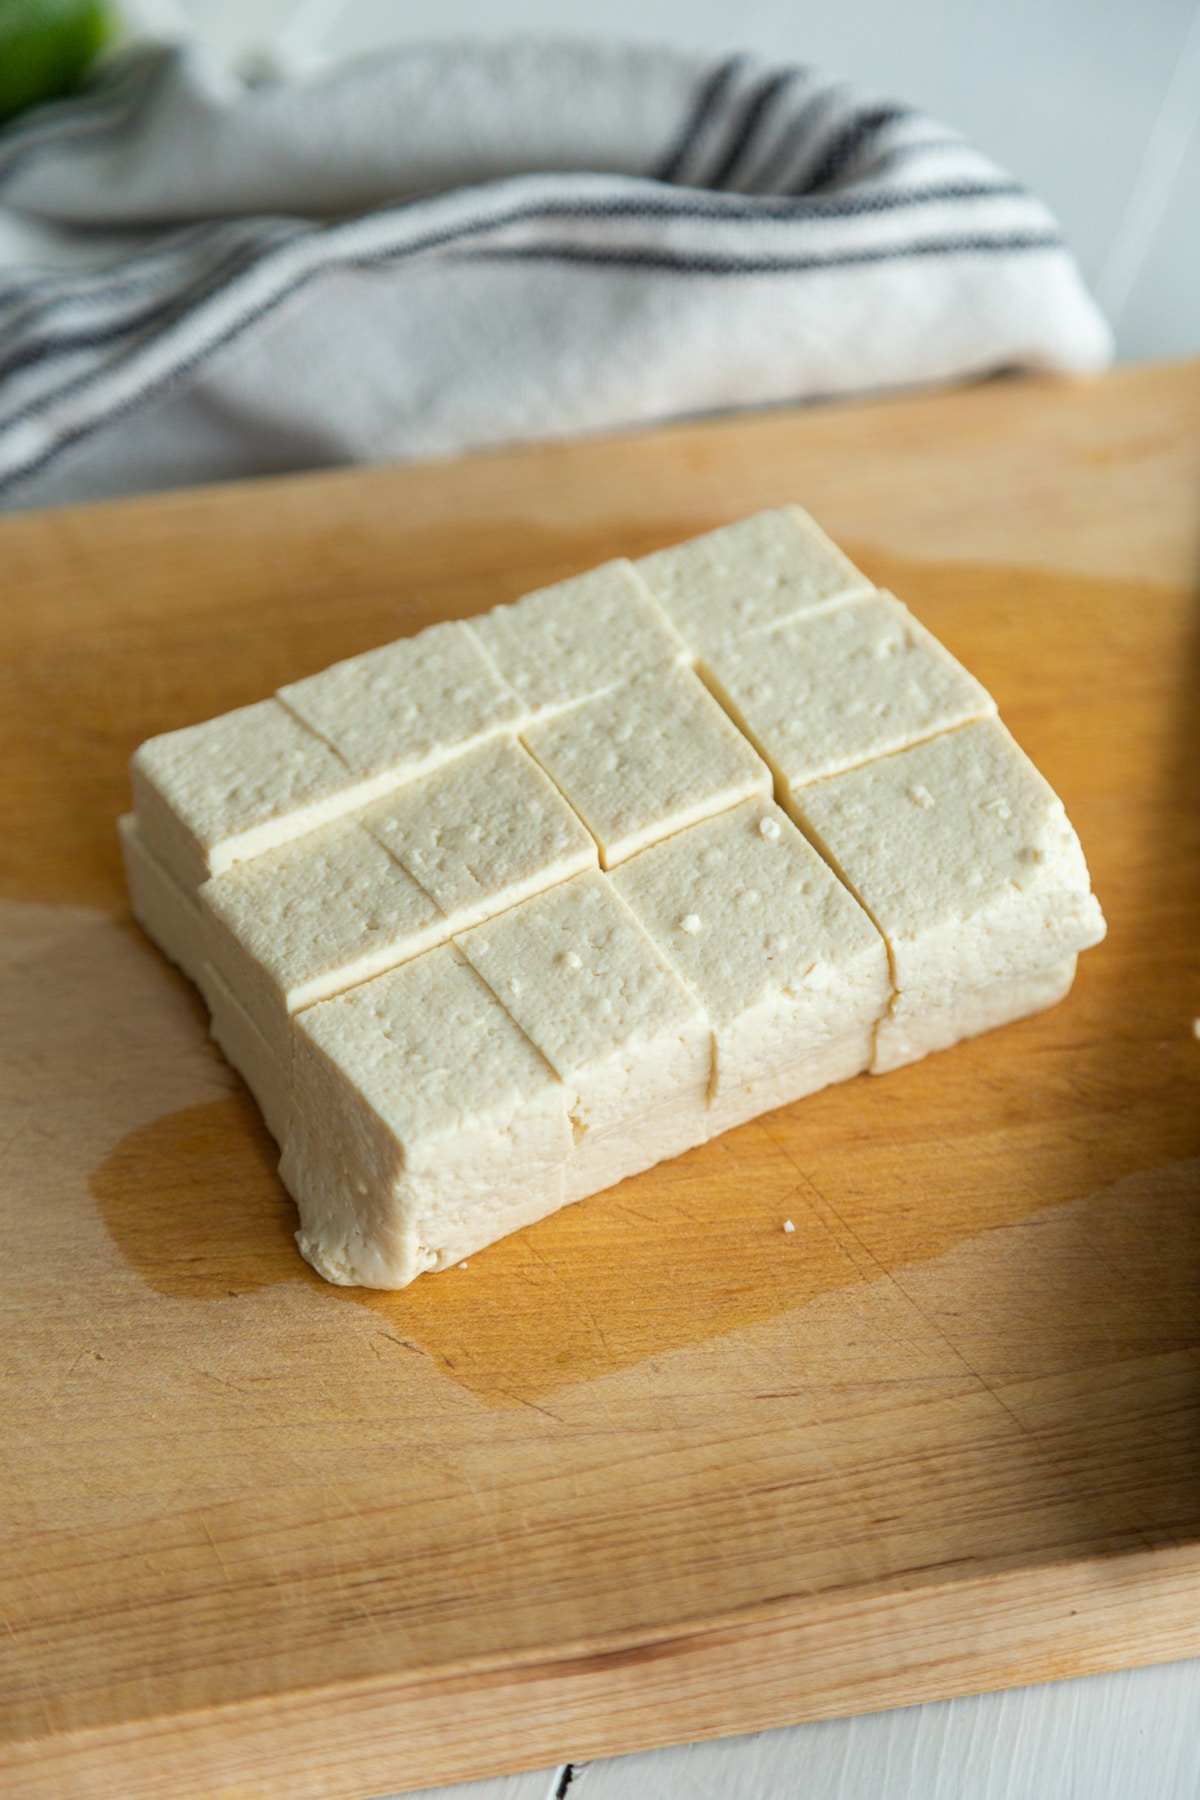 A square piece of tofu cut into cubes on a wooden board.